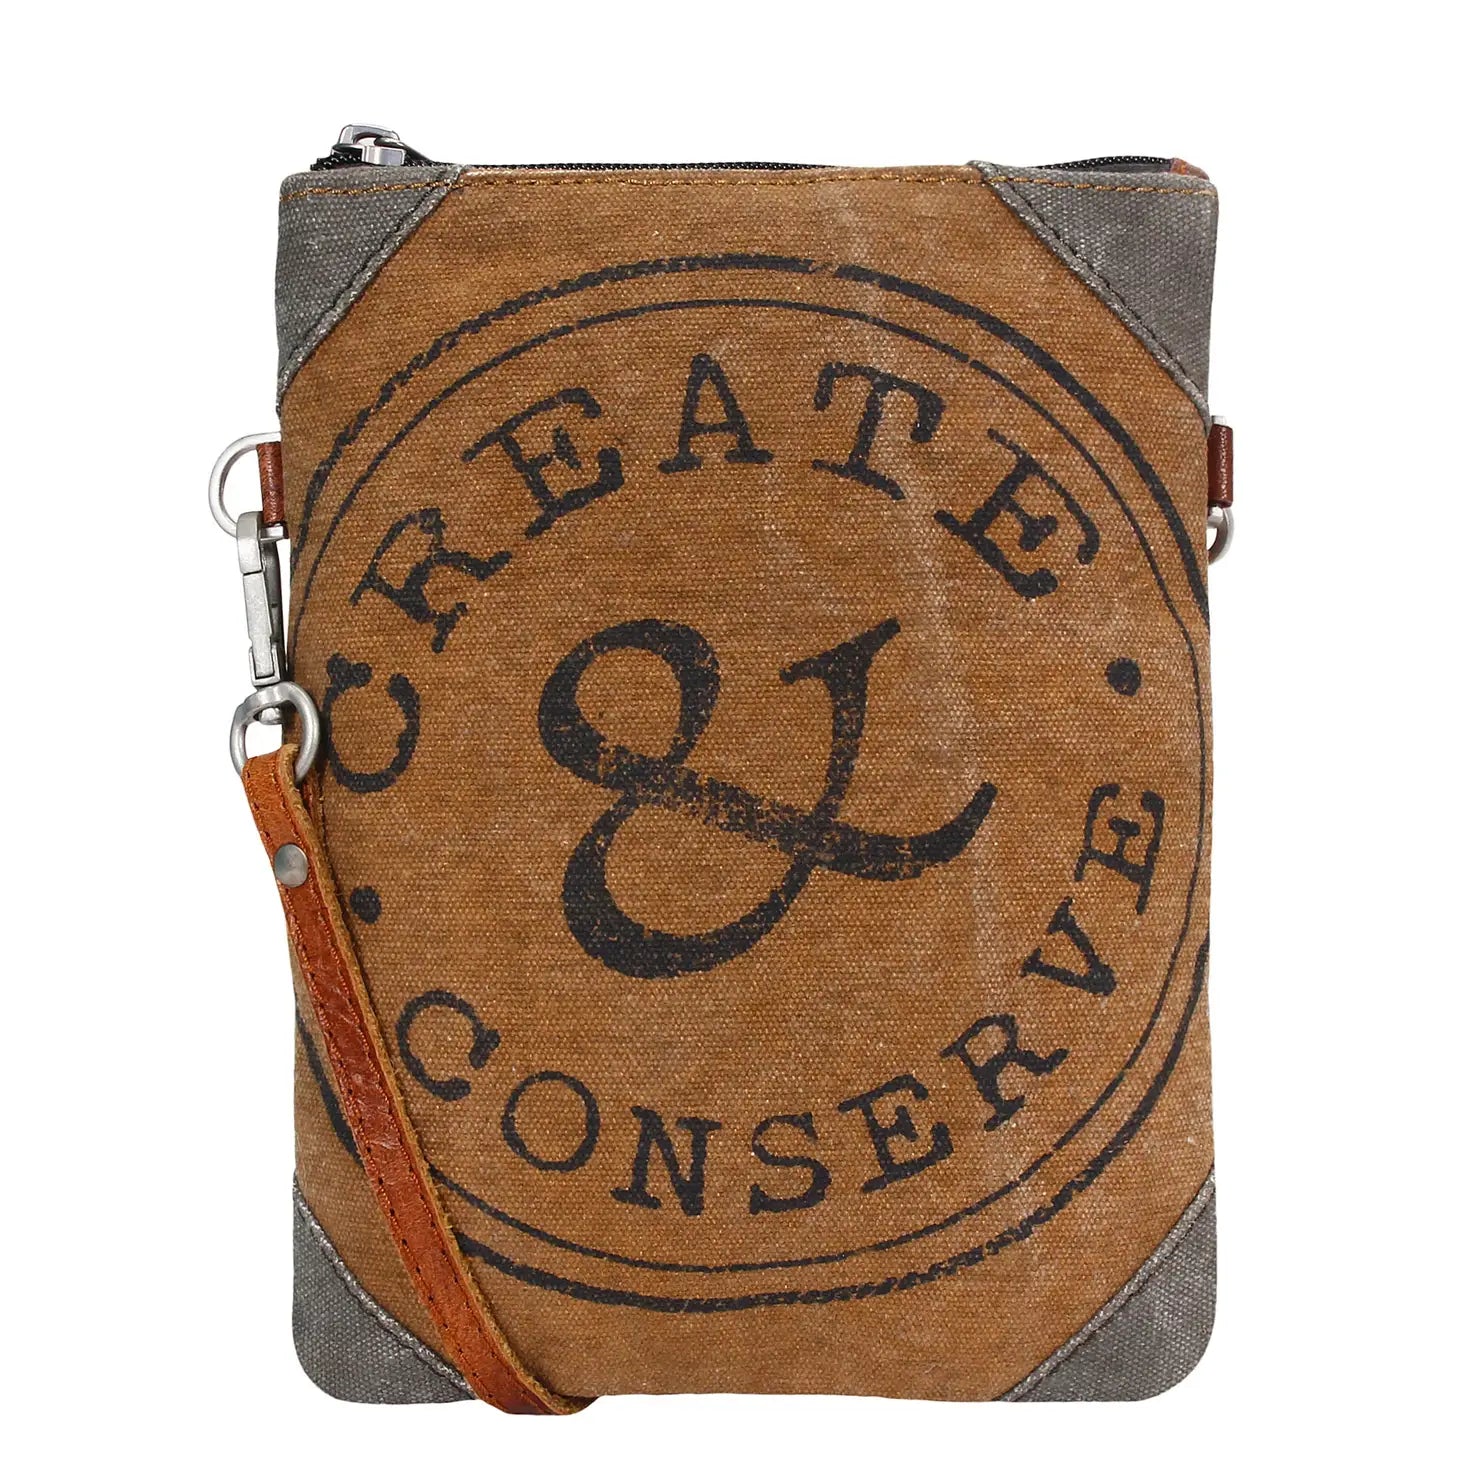 Create and Conserve Canvas Small Crossbody